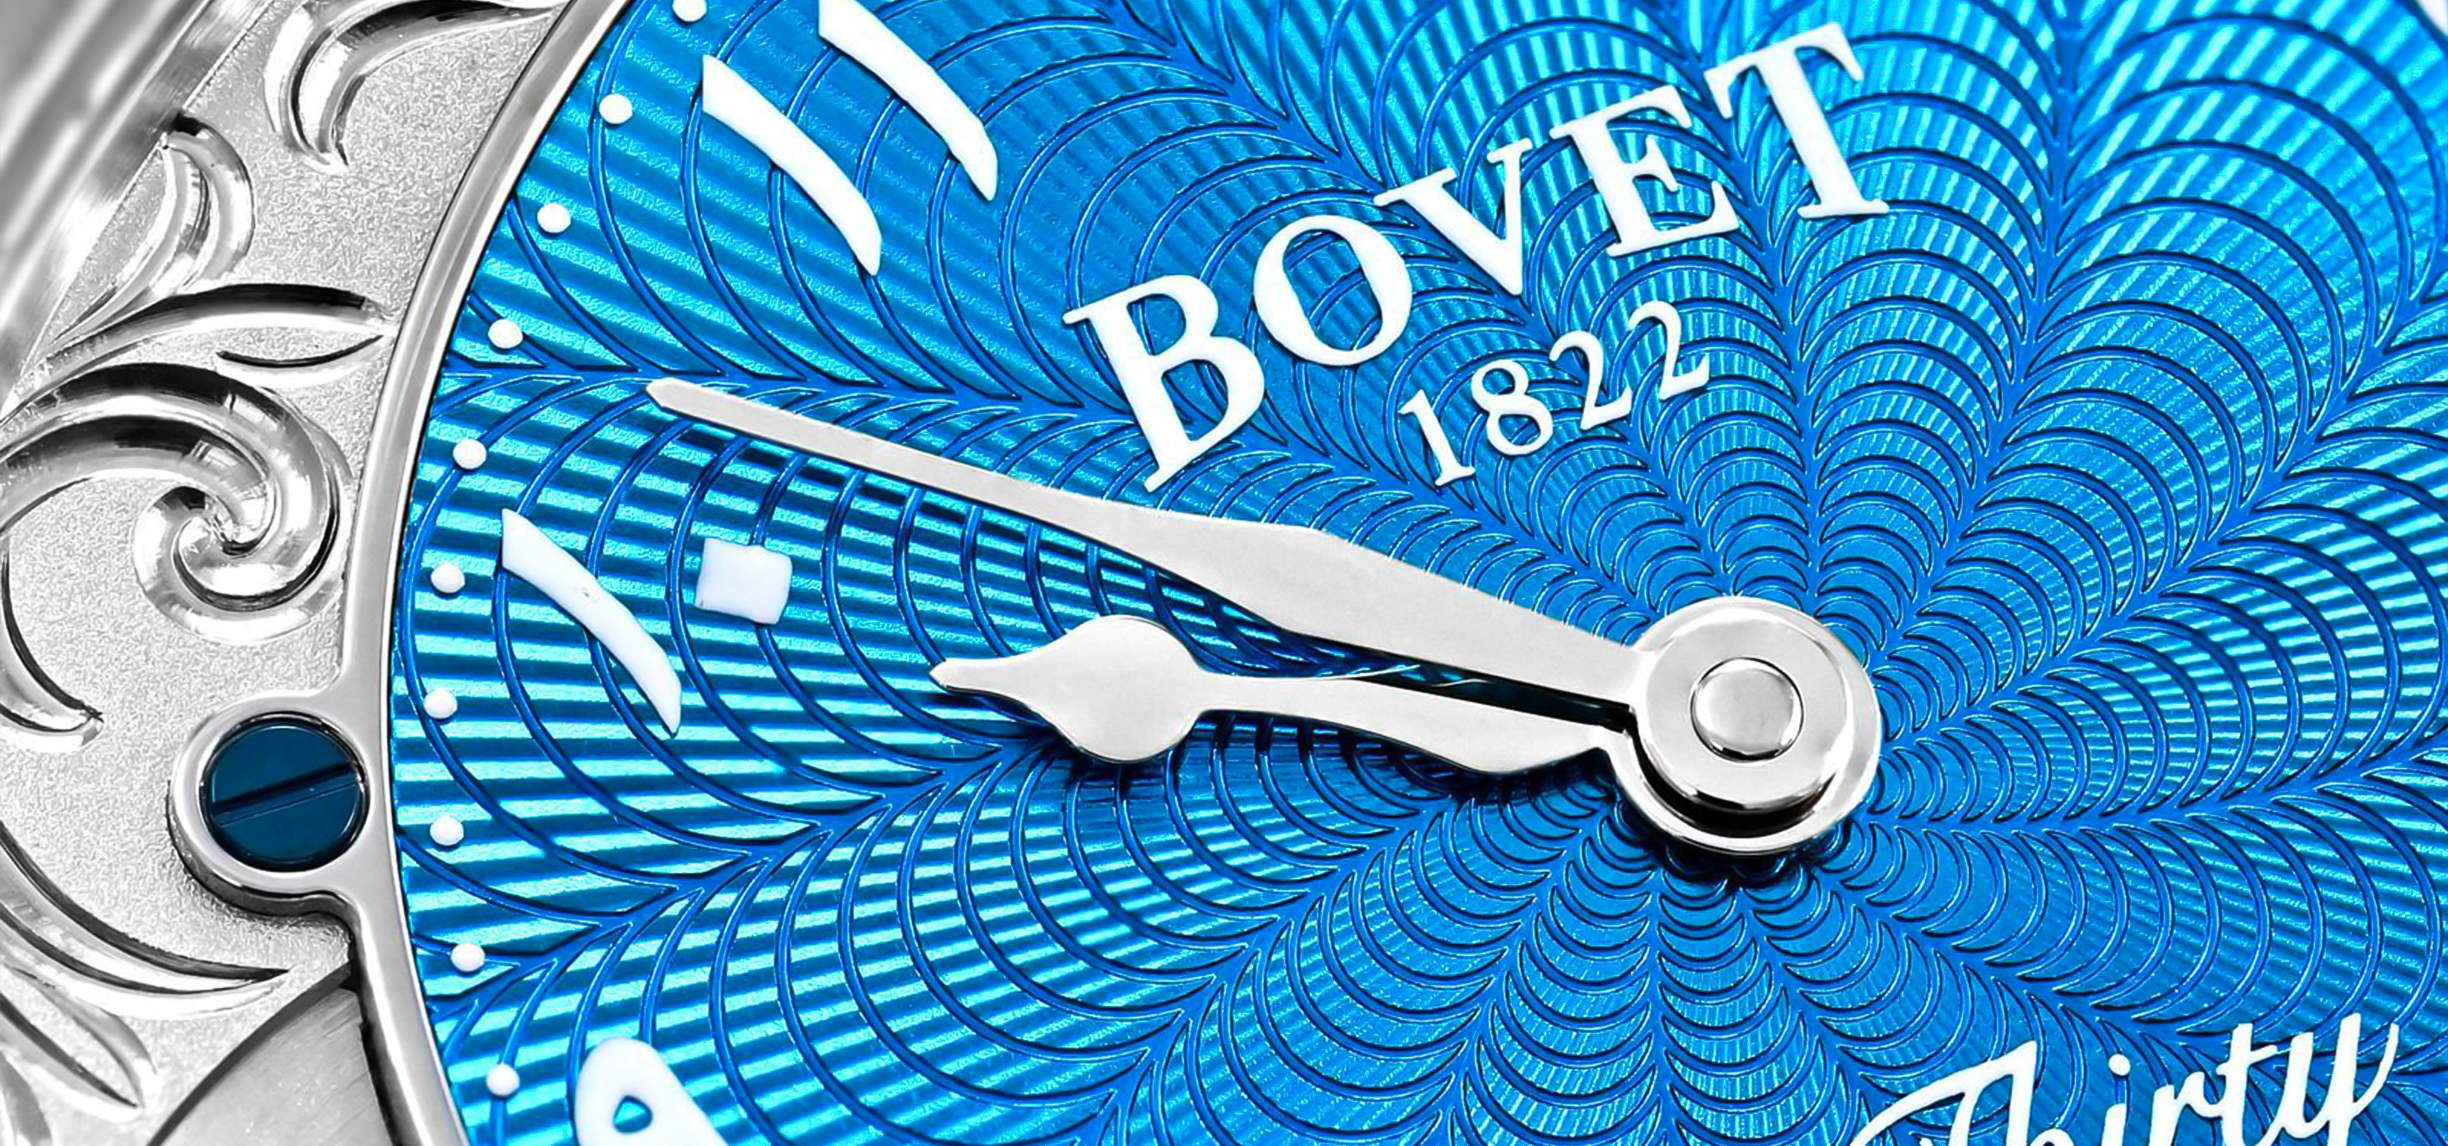 Bovet: A Timeless Heritage of Swiss Watch Excellence